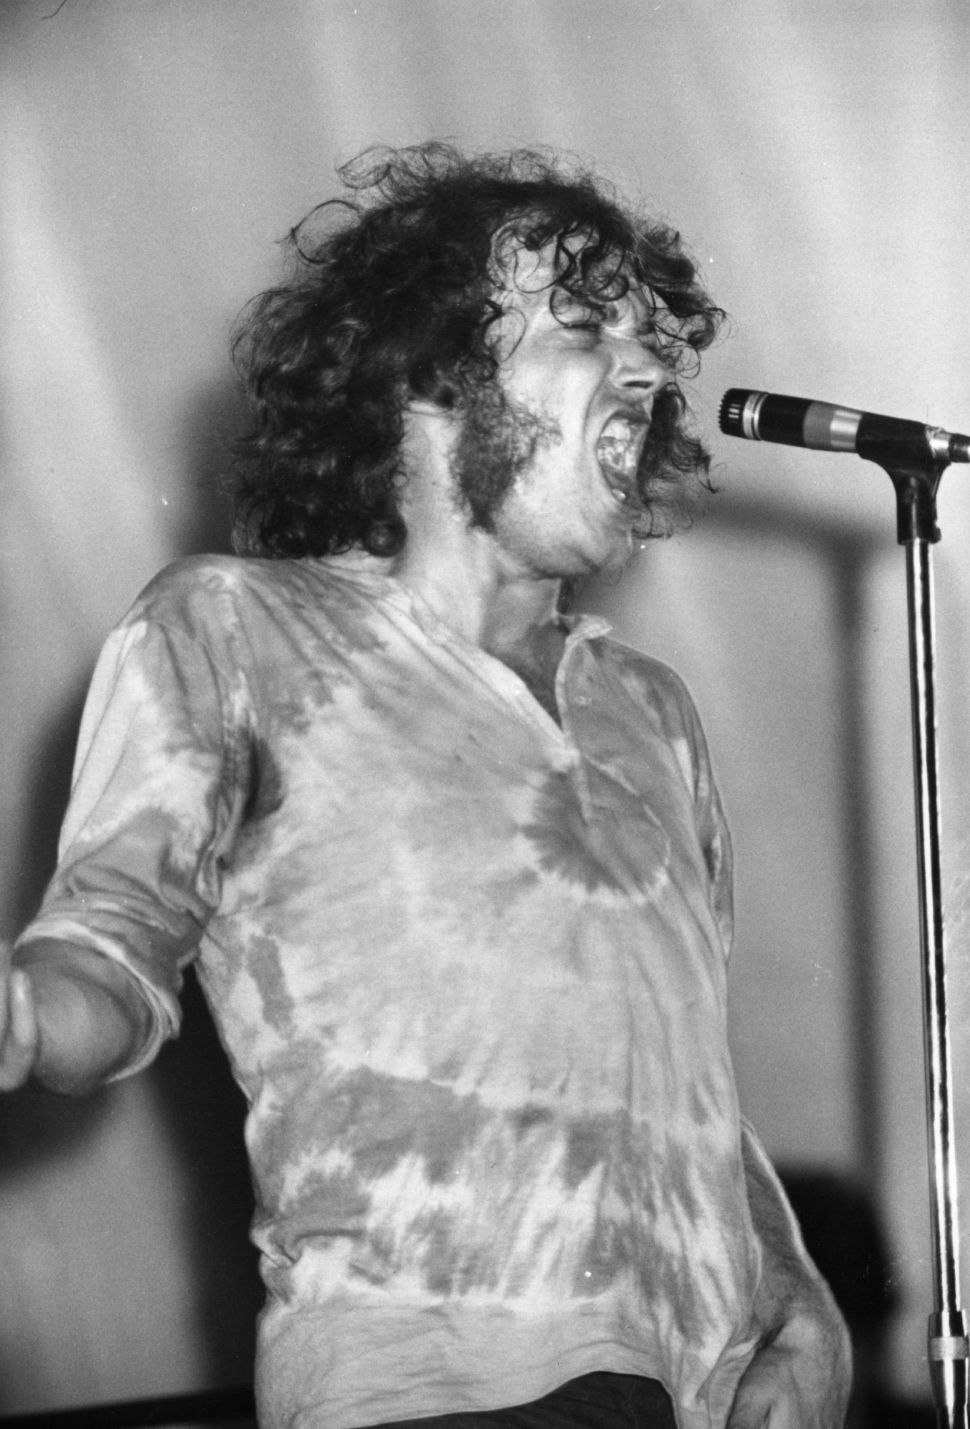 Sheffield born soul rock singer Joe Cocker on stage and mid-song at the Isle of Wight Festival.  (Central Press/Getty Images)